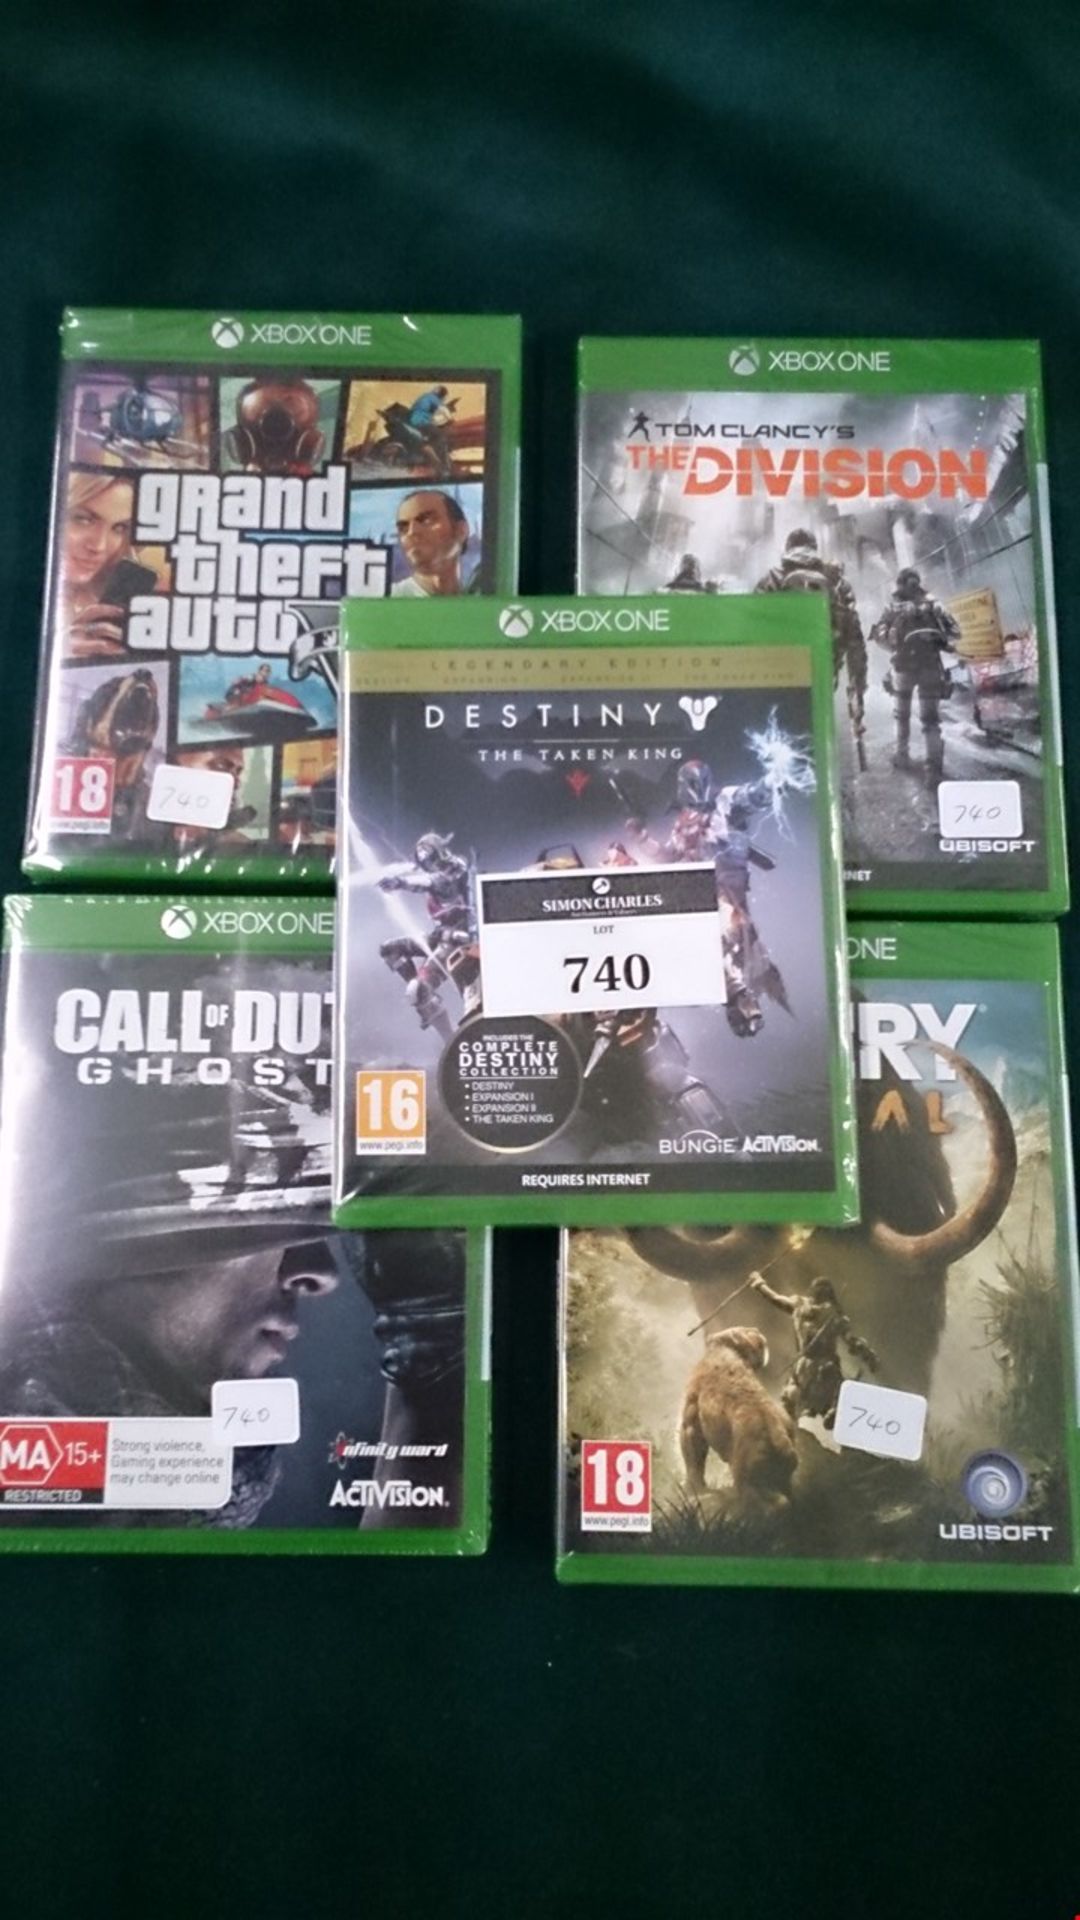 5 BOXED AND SEALED X-BOX ONE GAMES. DESTINY THE TAKEN KING, THE DIVISION, FARCRY PRIMAL, GTA 5...